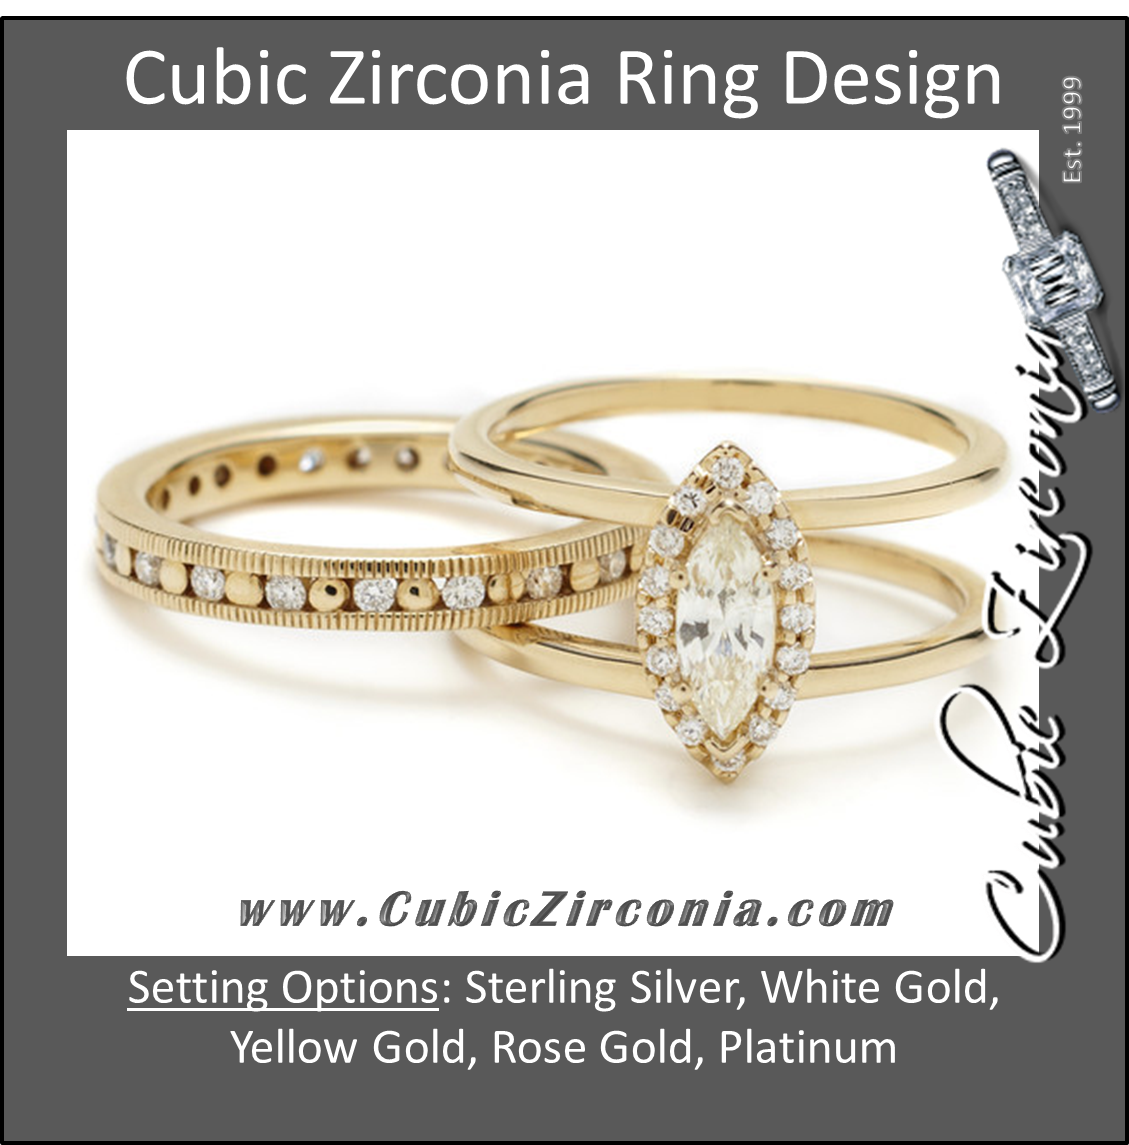 CZ Wedding Set, Double Banded Harness Ring with Round Channel Hand-Engraved Wedding Band